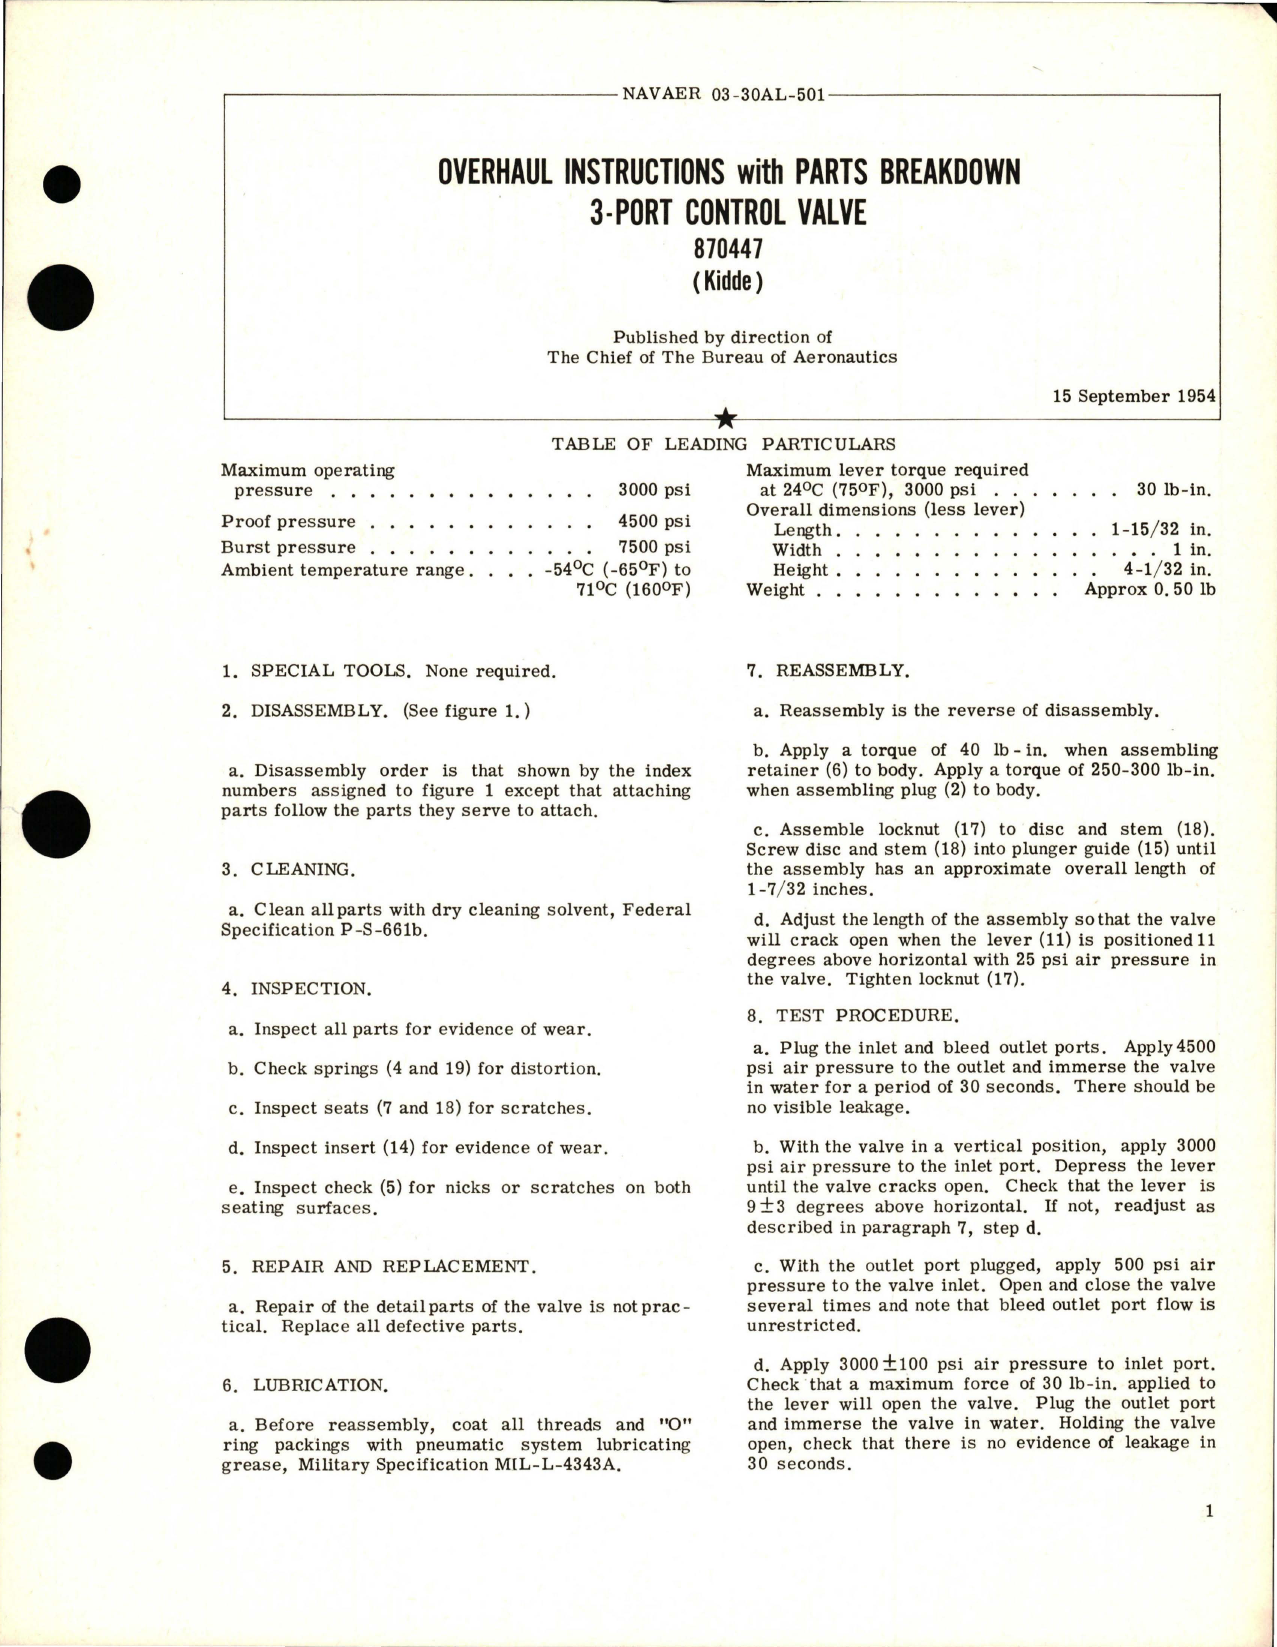 Sample page 1 from AirCorps Library document: Overhaul Instructions with Parts Breakdown for 3-Port Control Valve - 870447 